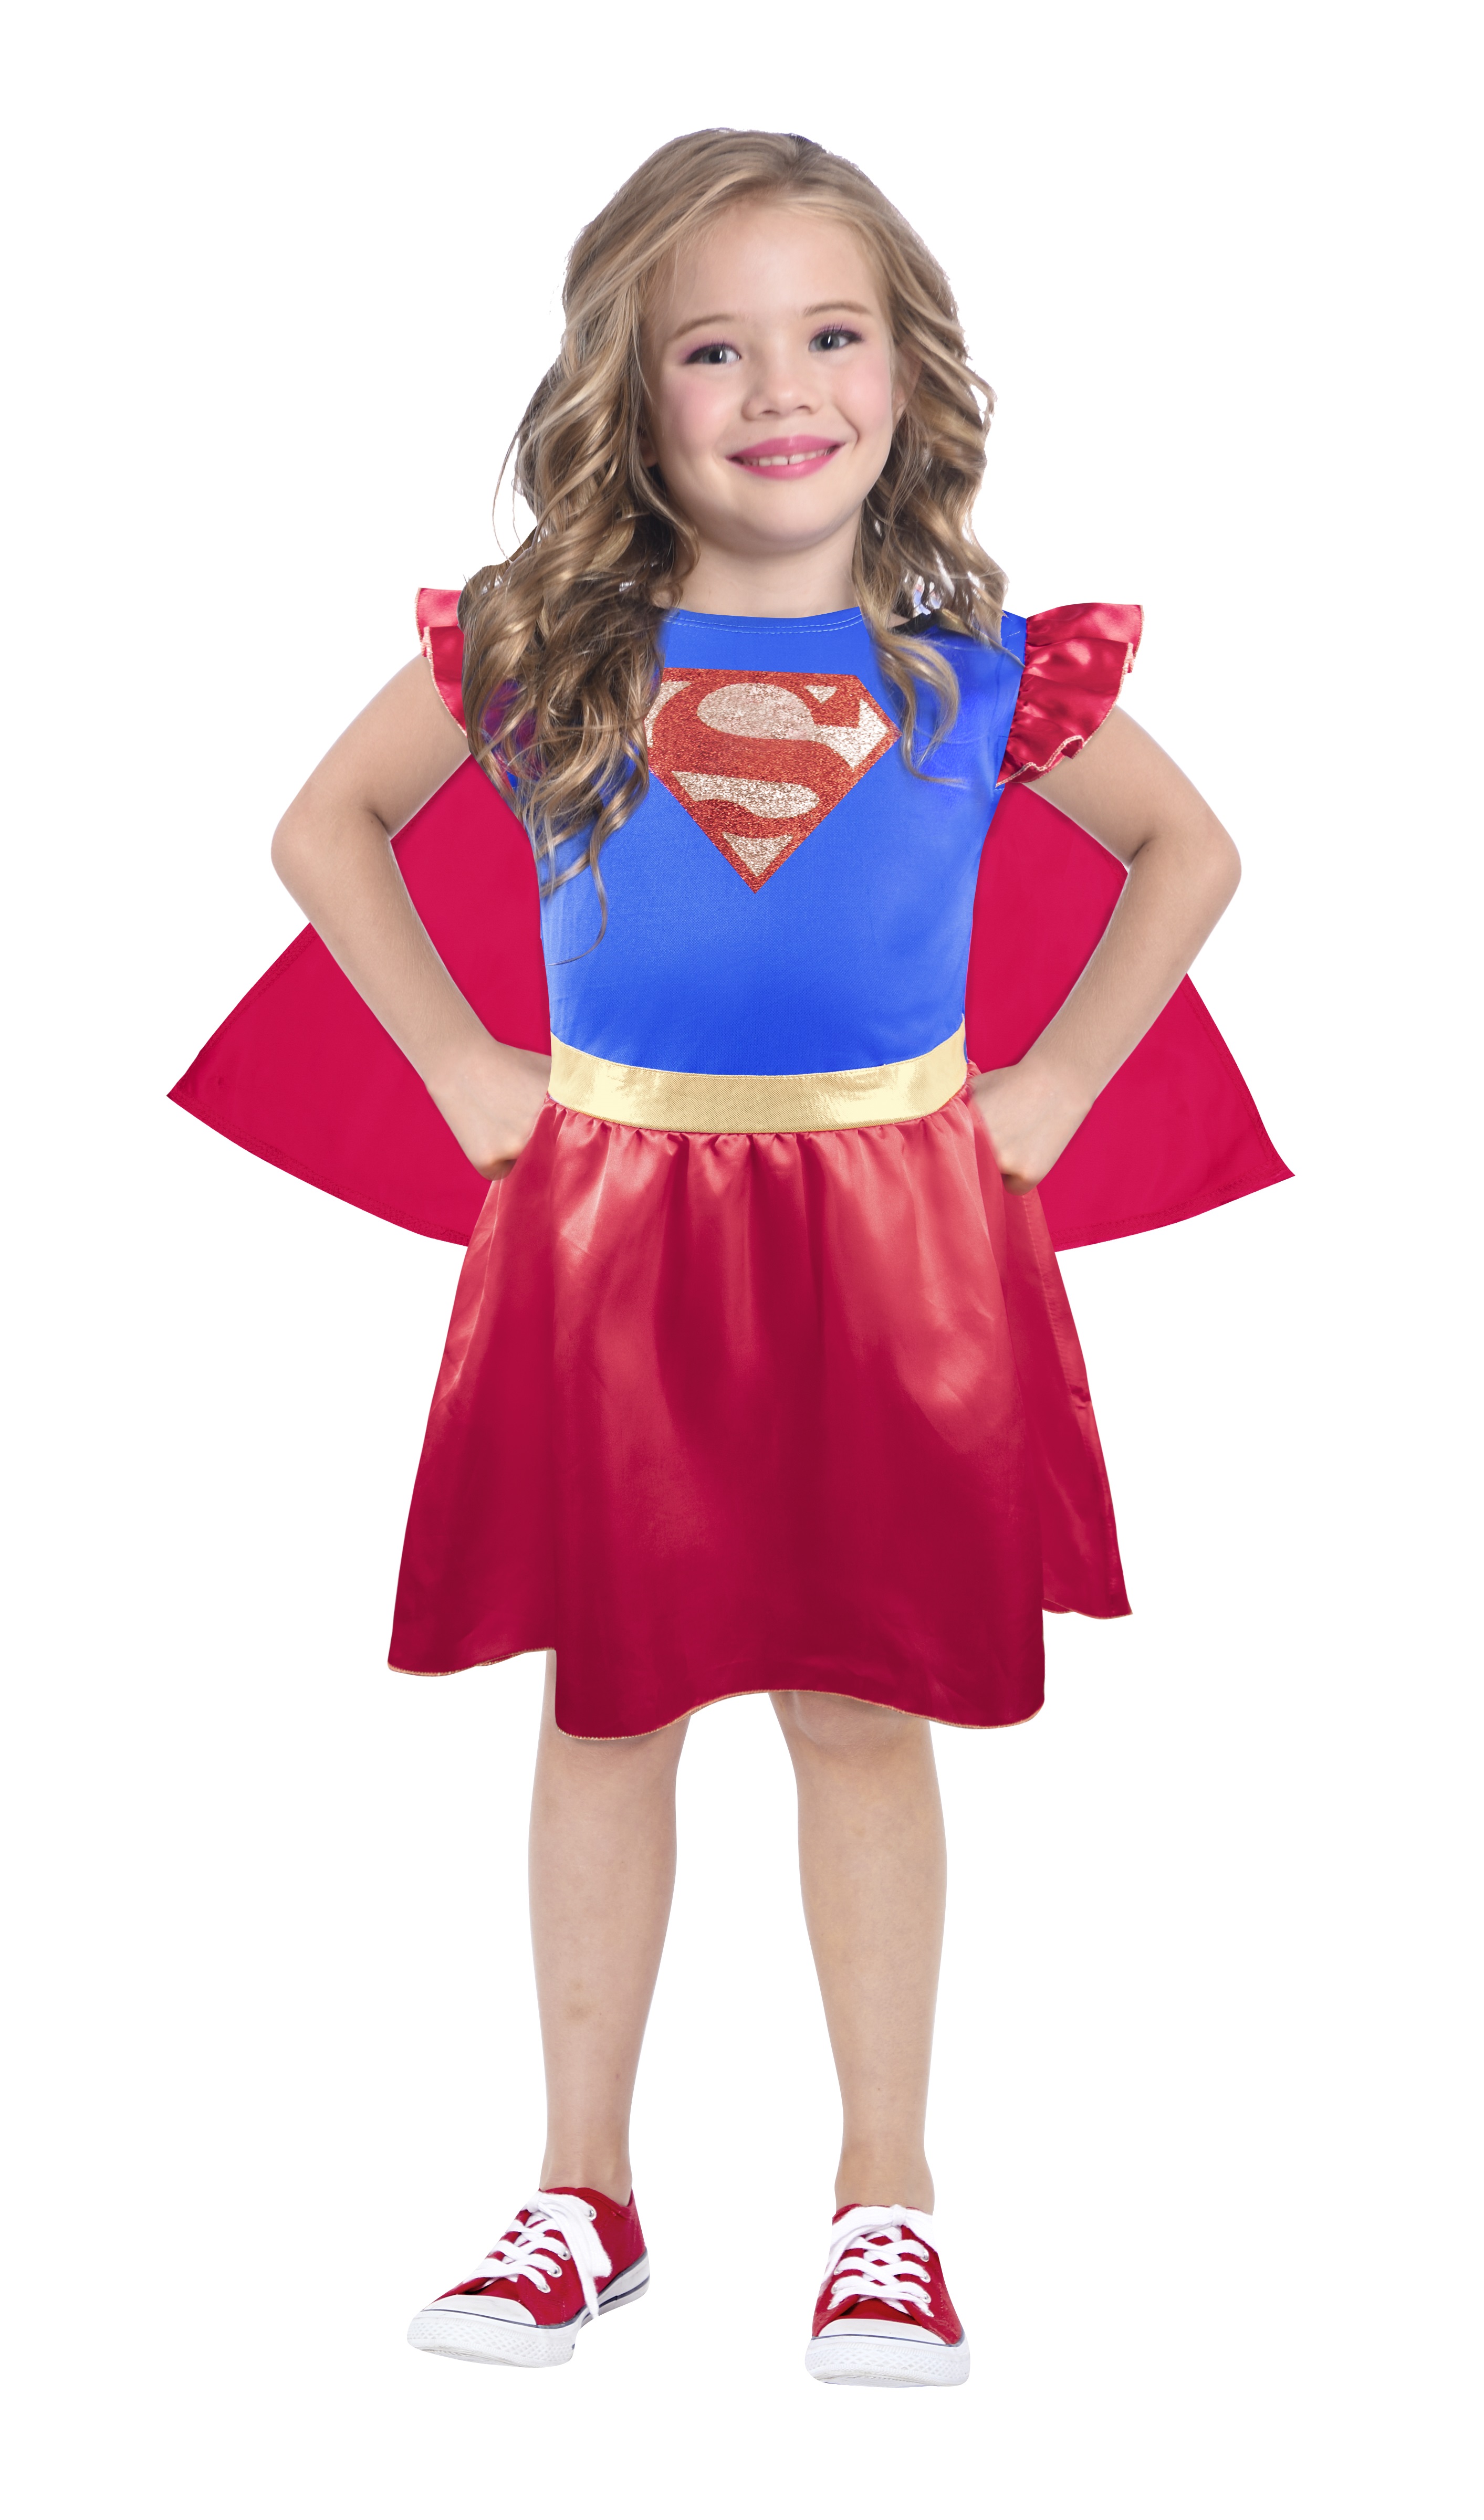 CO:Supergirl Dress 6-7 Years